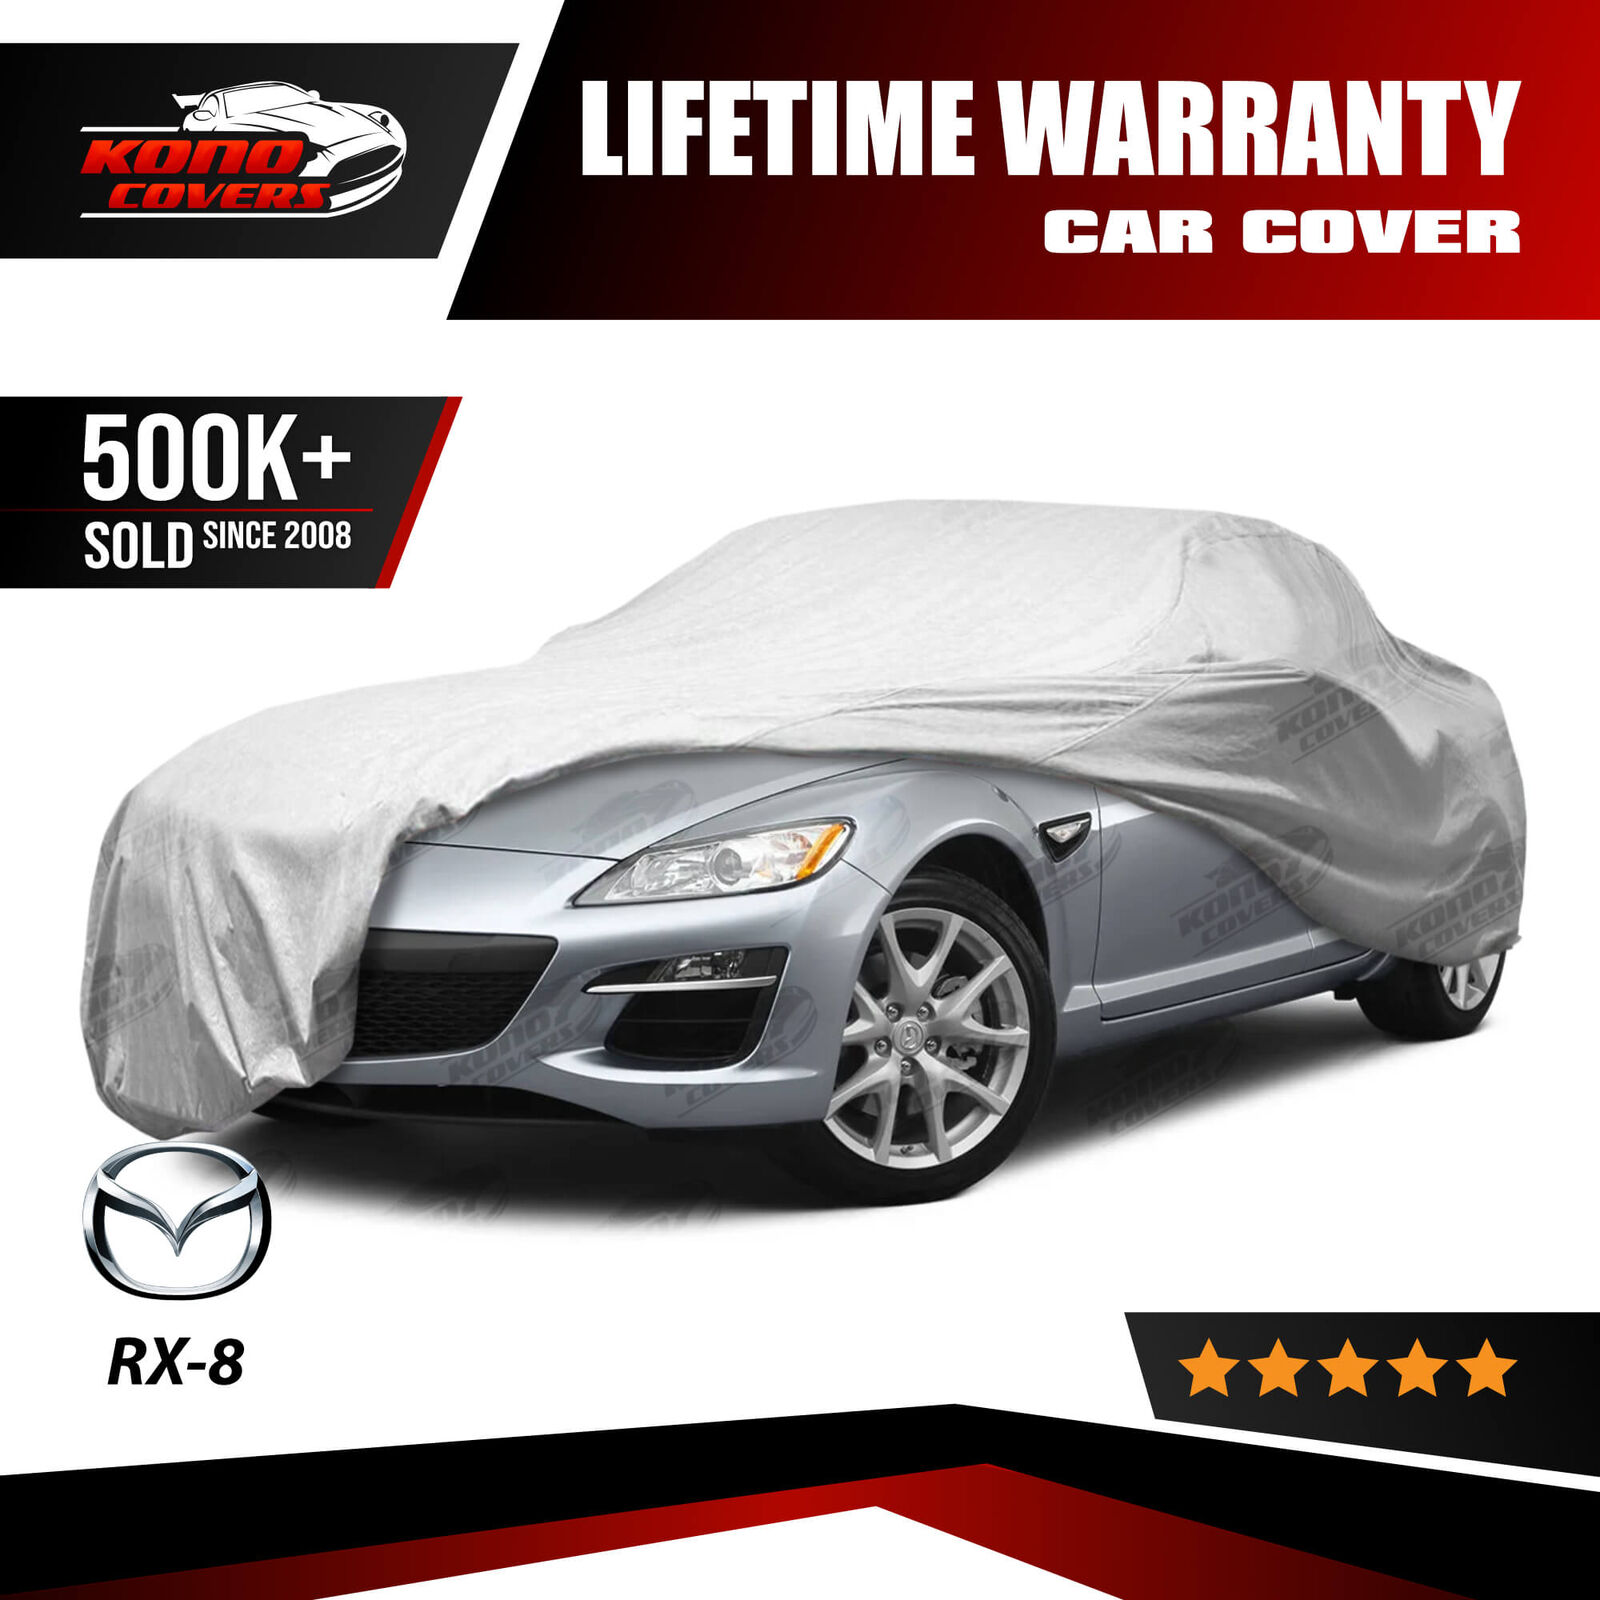 Mazda RX-8 5 Layer Car Cover Fitted In Out door Water Proof Rain Snow Sun Dust